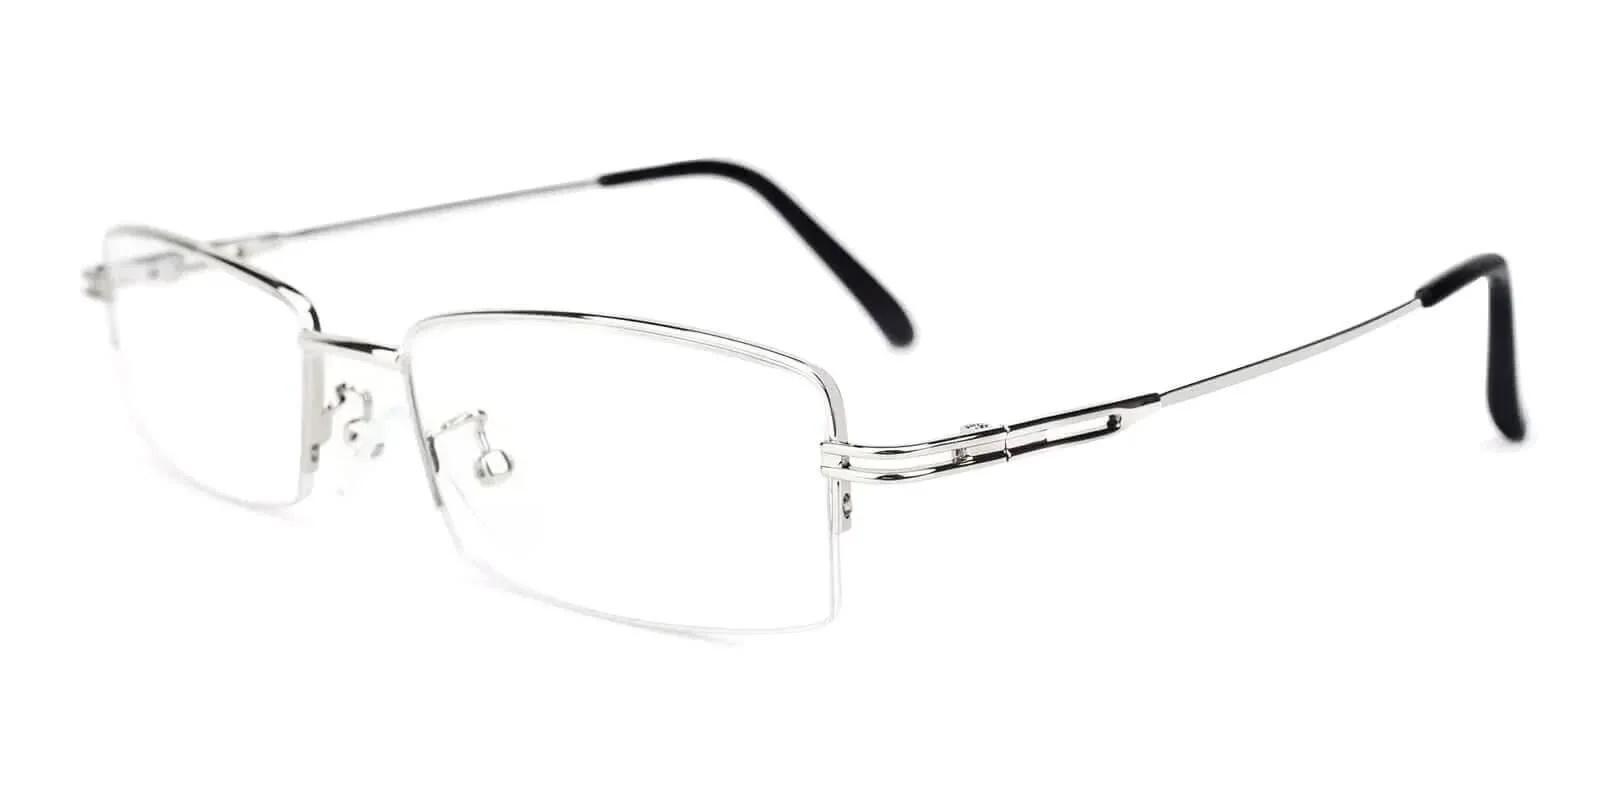 Connor Silver Metal Eyeglasses , NosePads Frames from ABBE Glasses